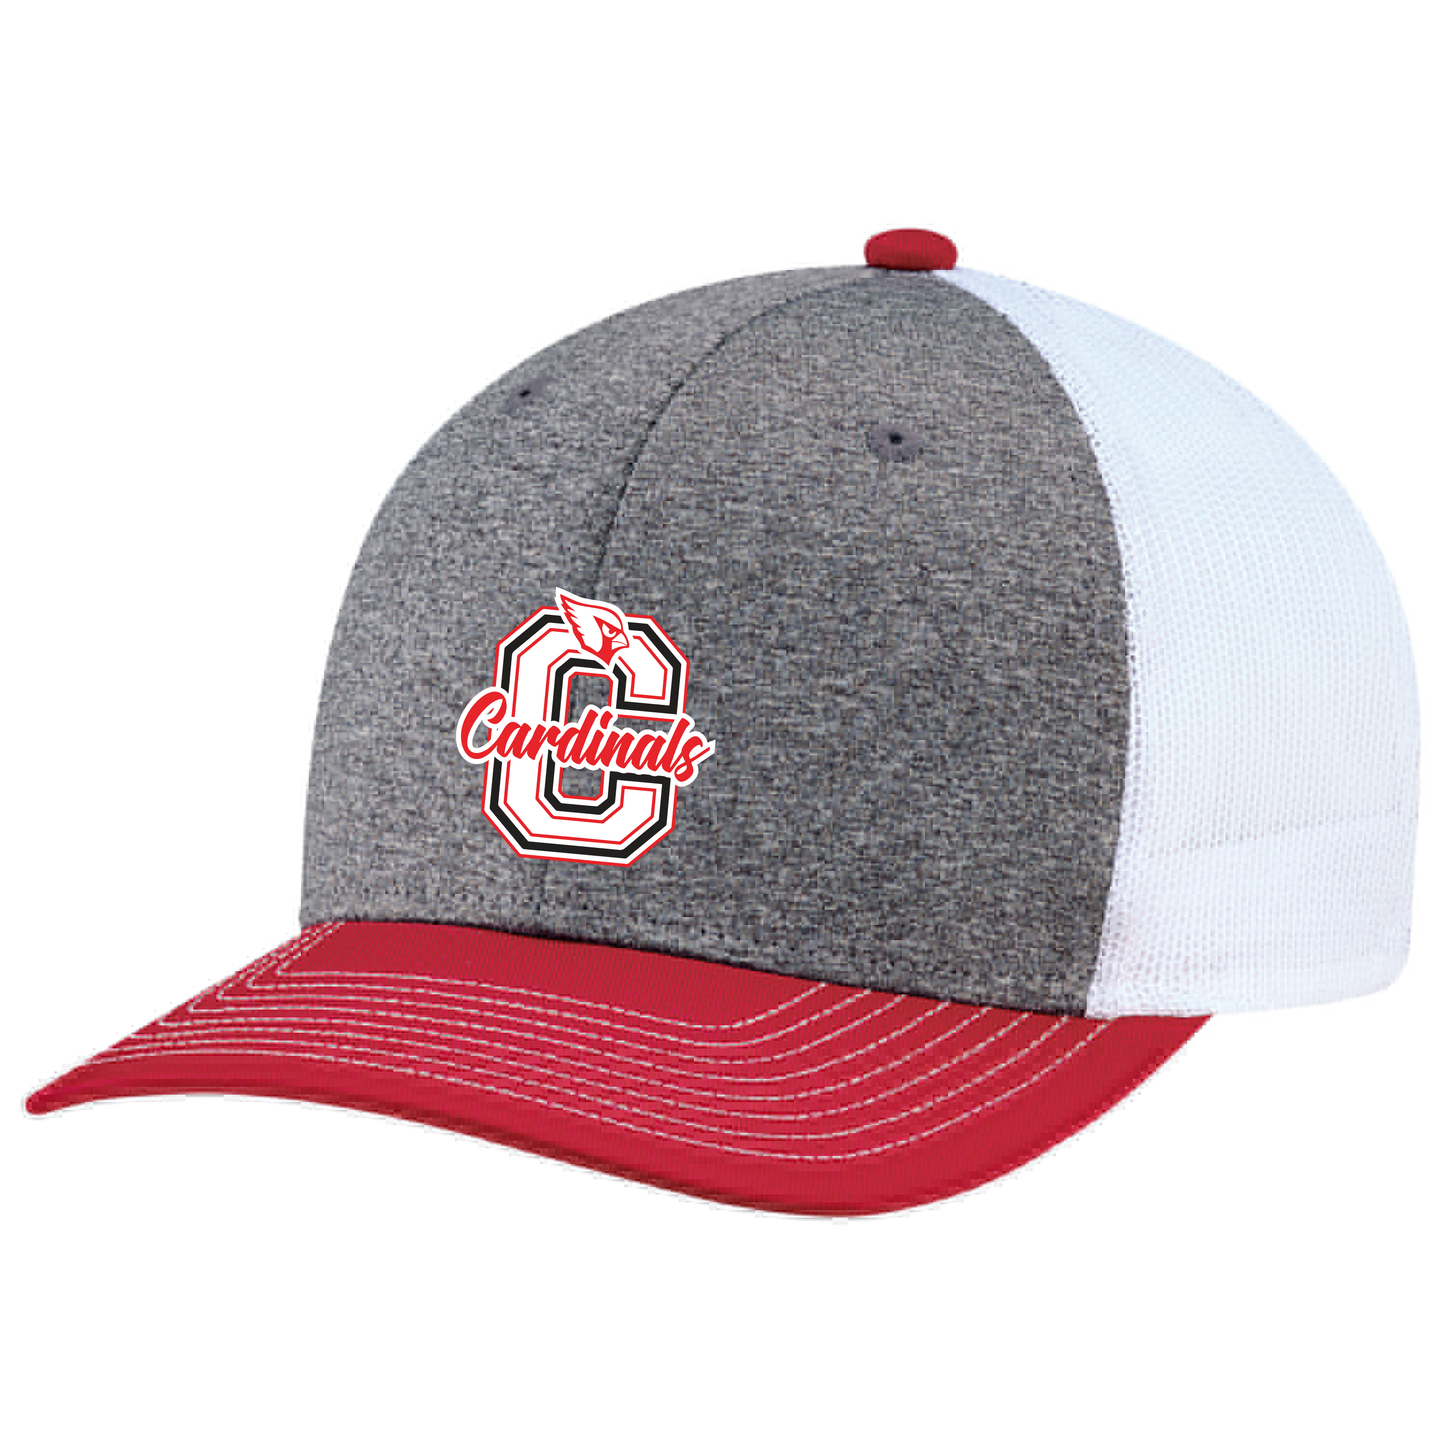 Creemore Cardinals Tricolored Hat